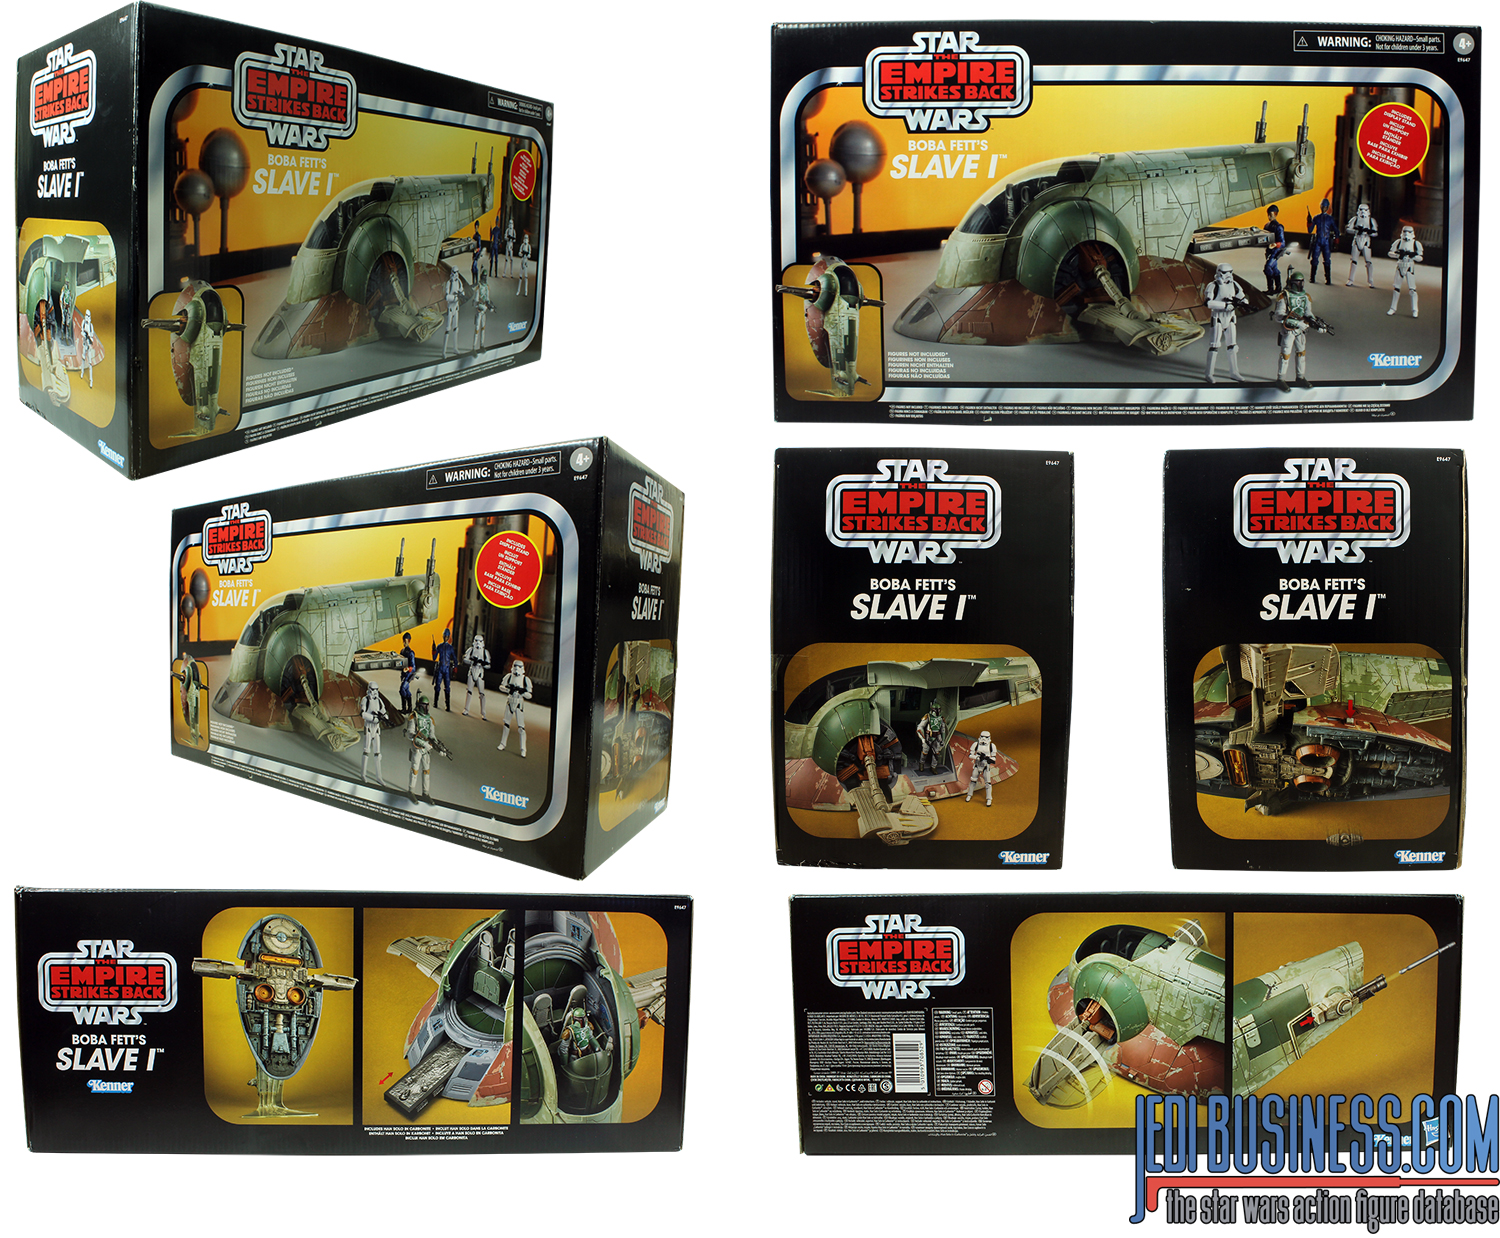 The Vintage Collection Slave 1 packaging